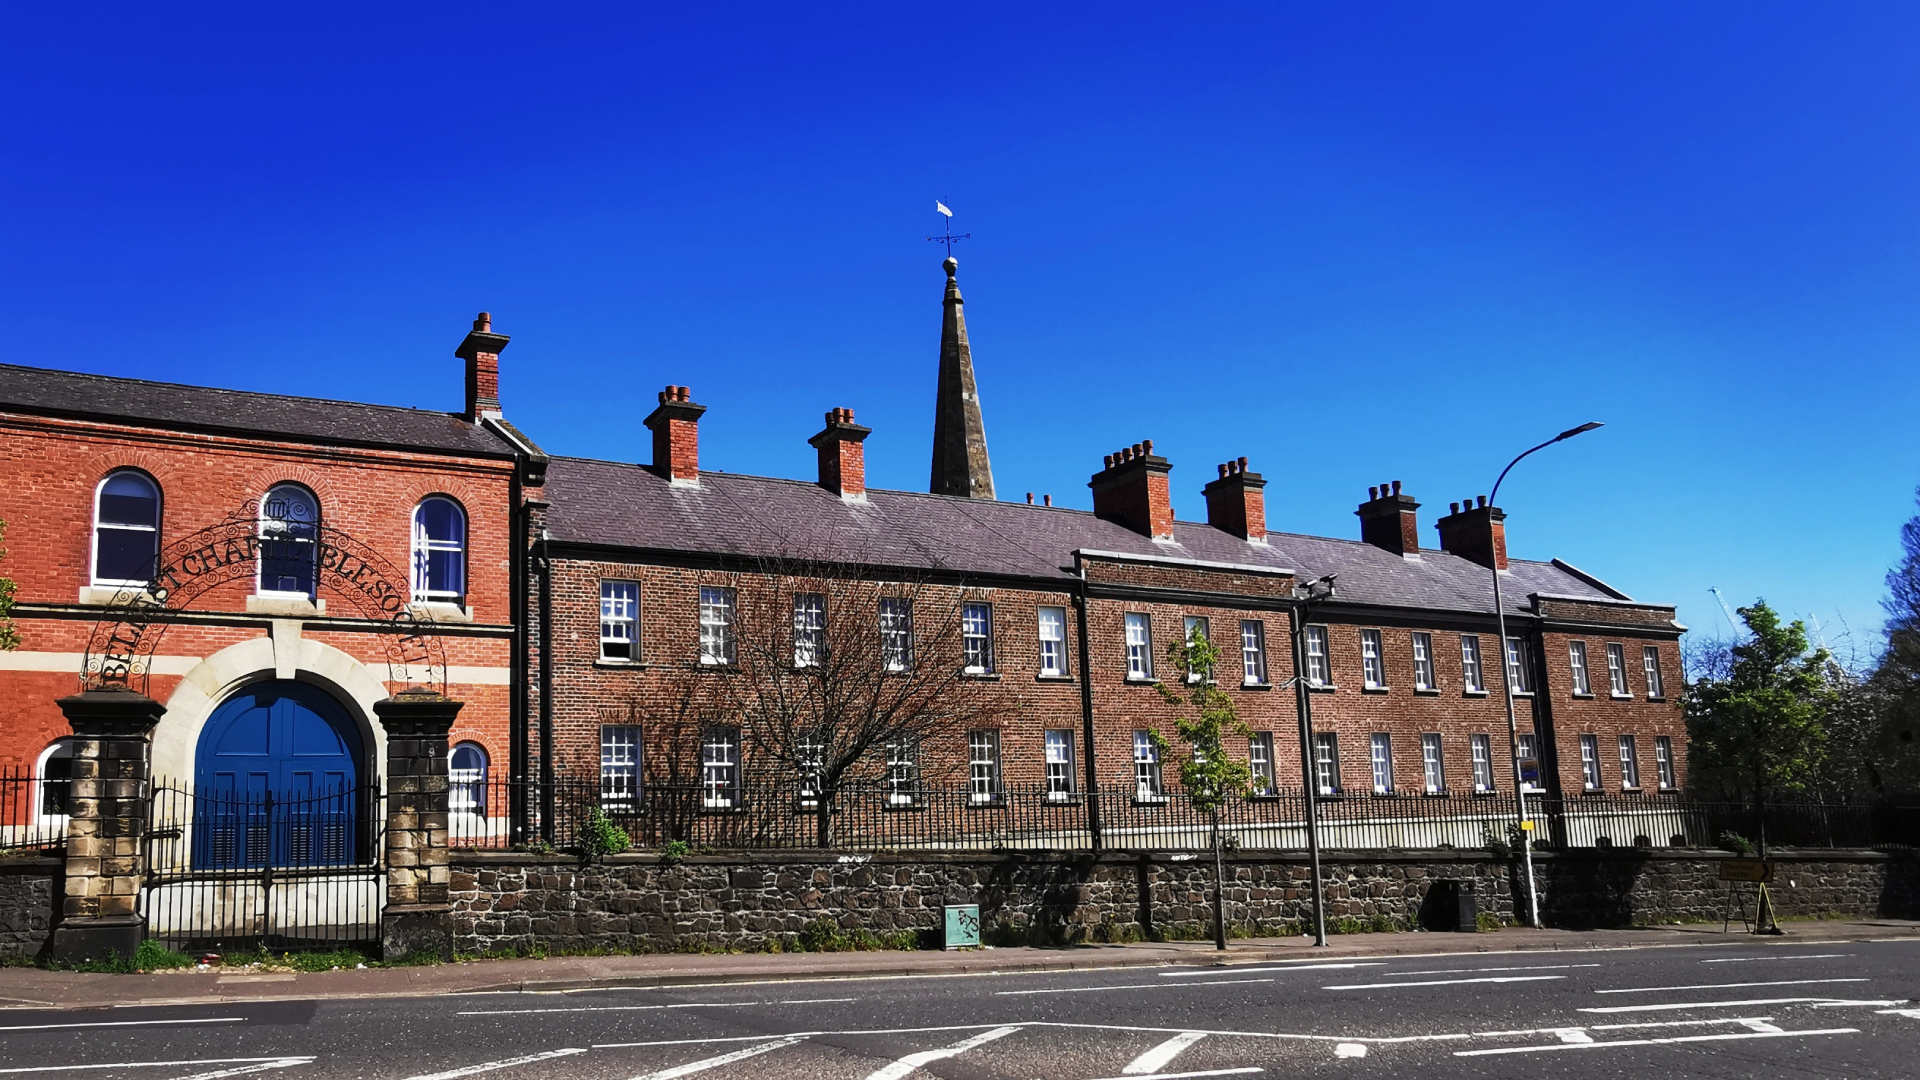 During the Second World War, residents of the Belfast Charitable Institution on Clifton Street, Belfast evacuated to the north coast. The buildings is now Clifton House, a Grade-A listed heritage venue.